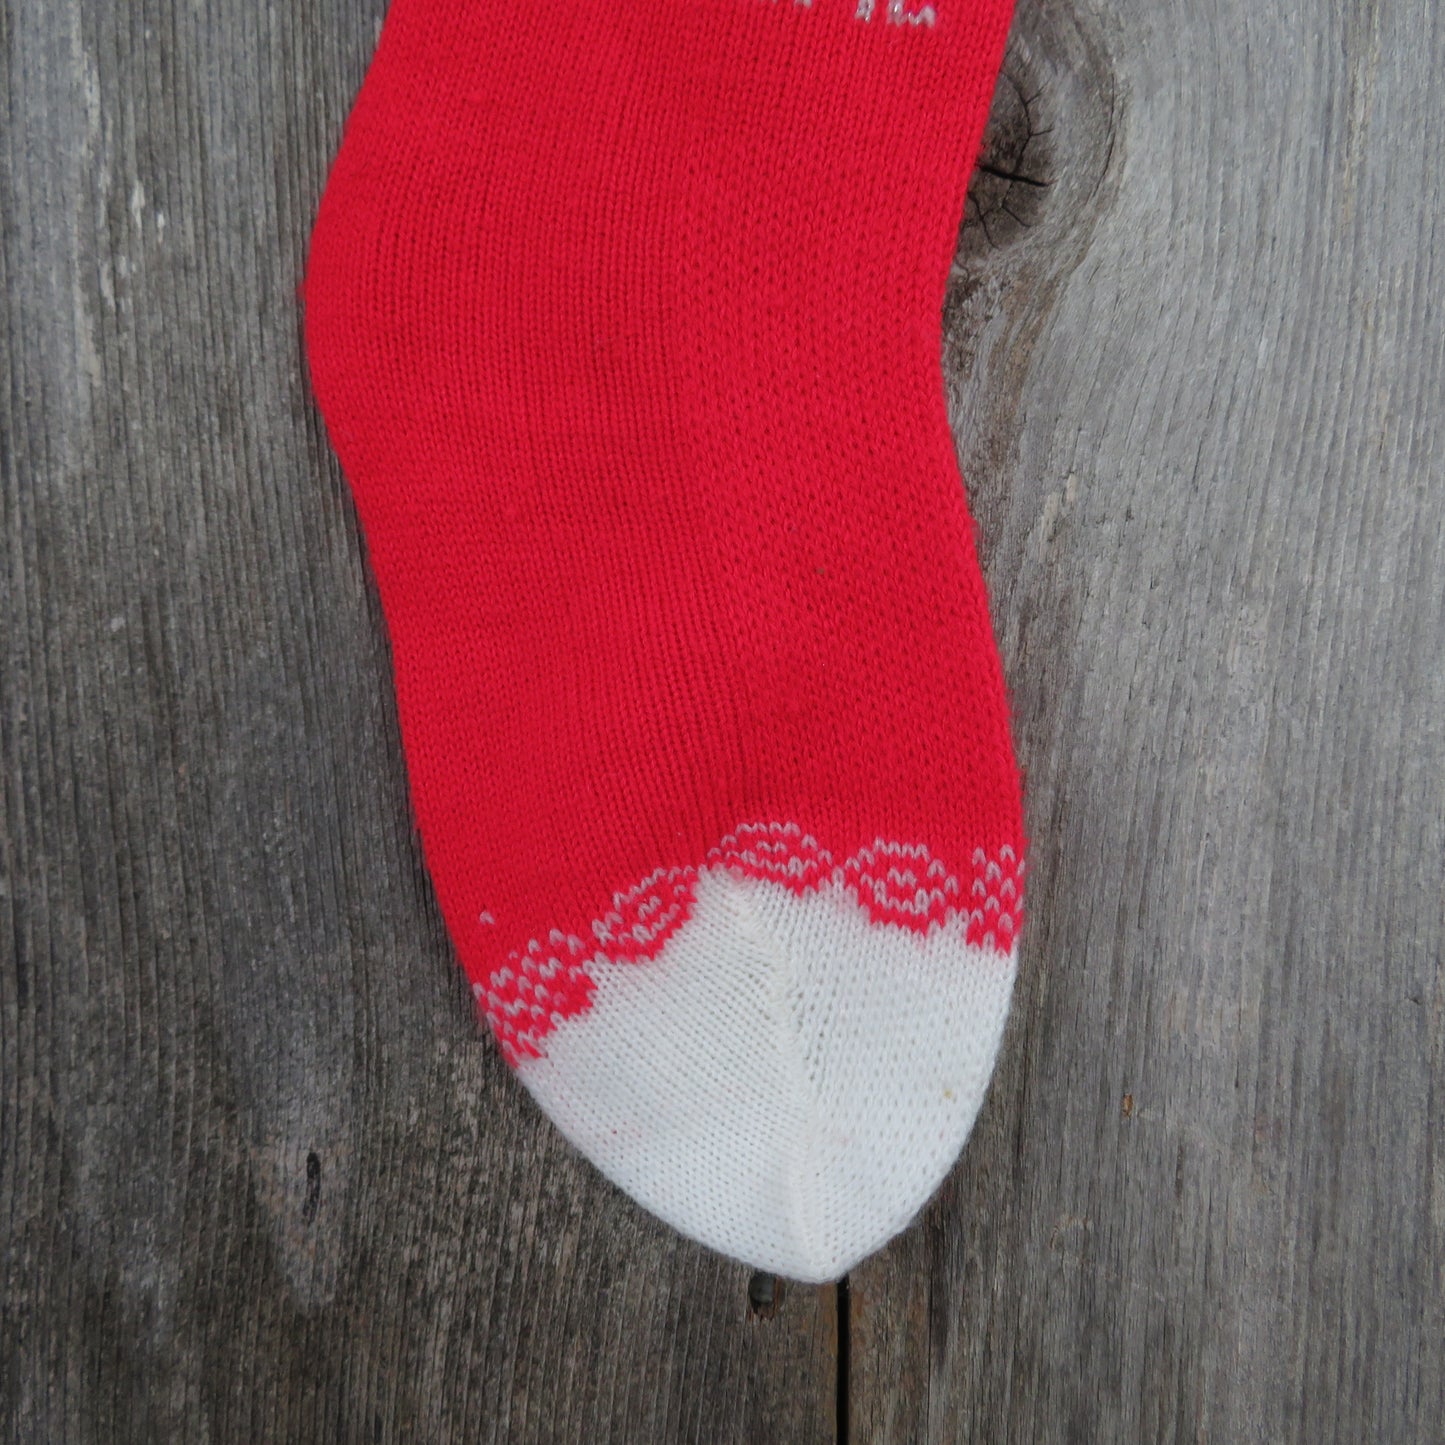 Vintage Welcome Home Stocking Knit Christmas Knitted House Red White 1980s - At Grandma's Table